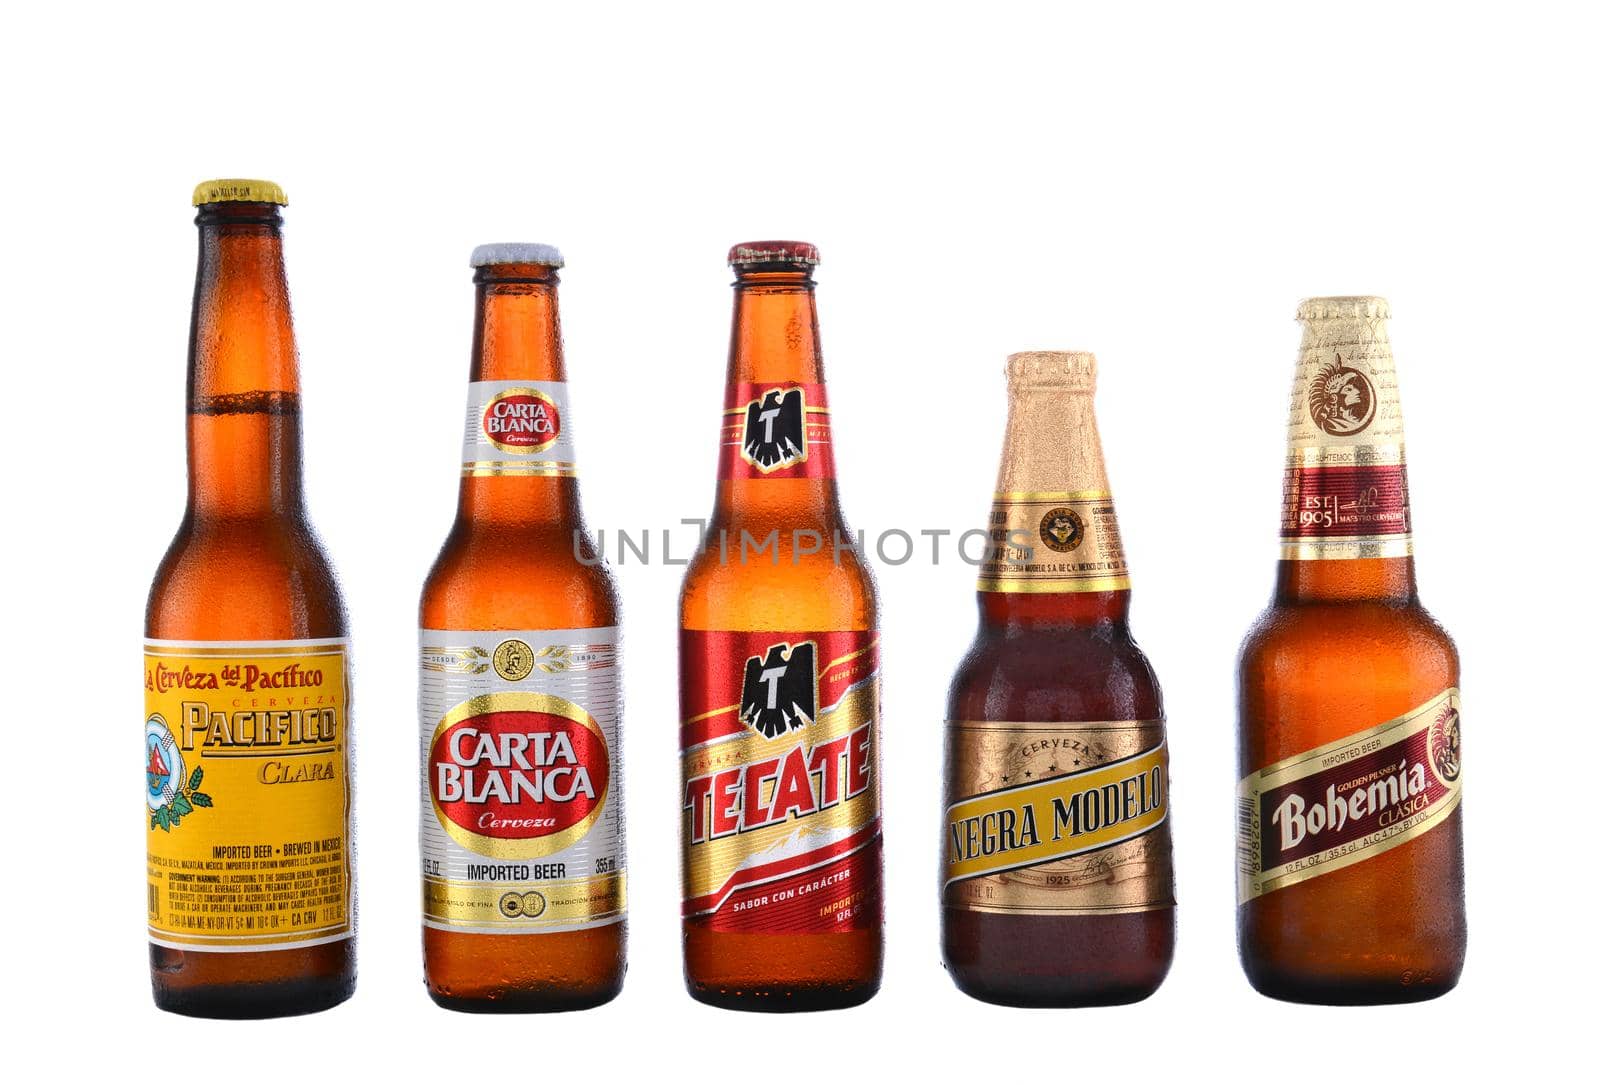 IRVINE, CA - JUNE 14, 2015: Five Mexican Beers. Pacifico, Carta Blanca, Tecate, Negra Modelo, and Bohemia are five of the most popular Mexican beers imported into the US. 